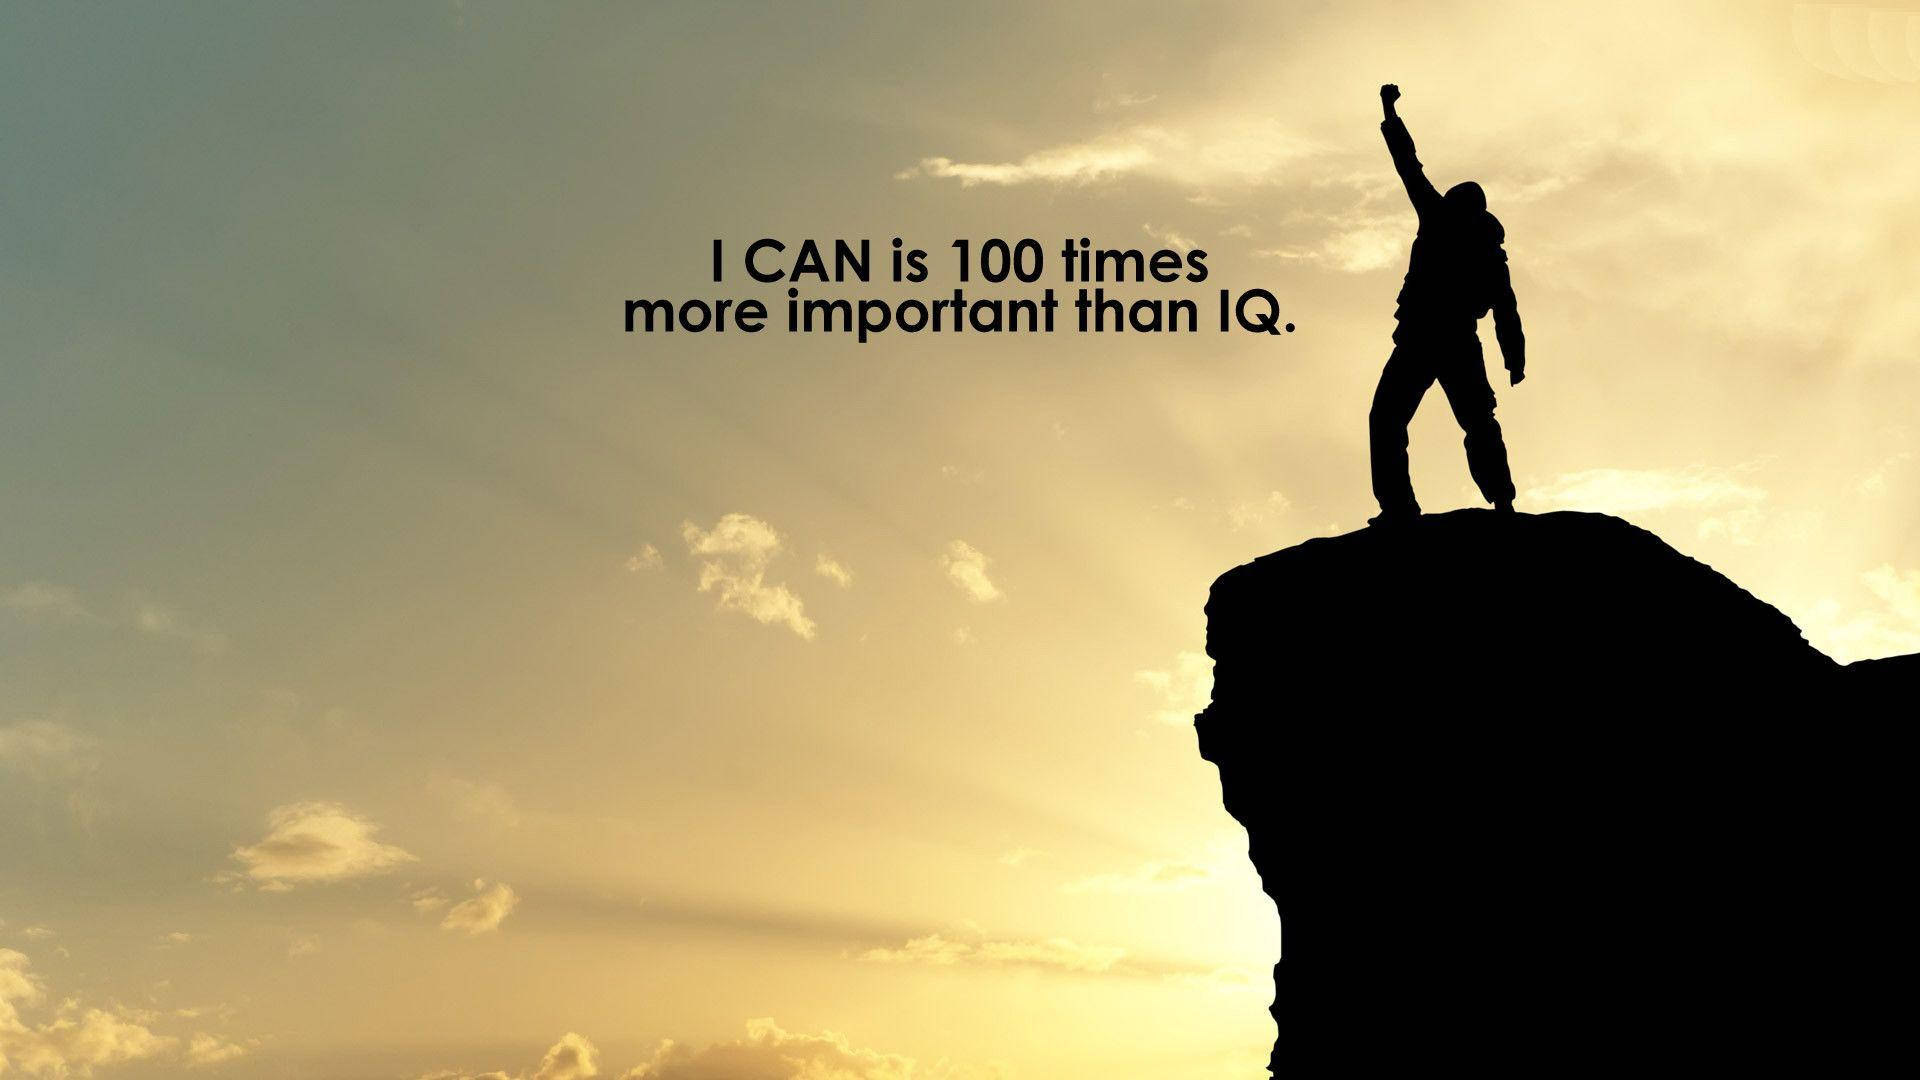 Inspirational Quotes About I Can